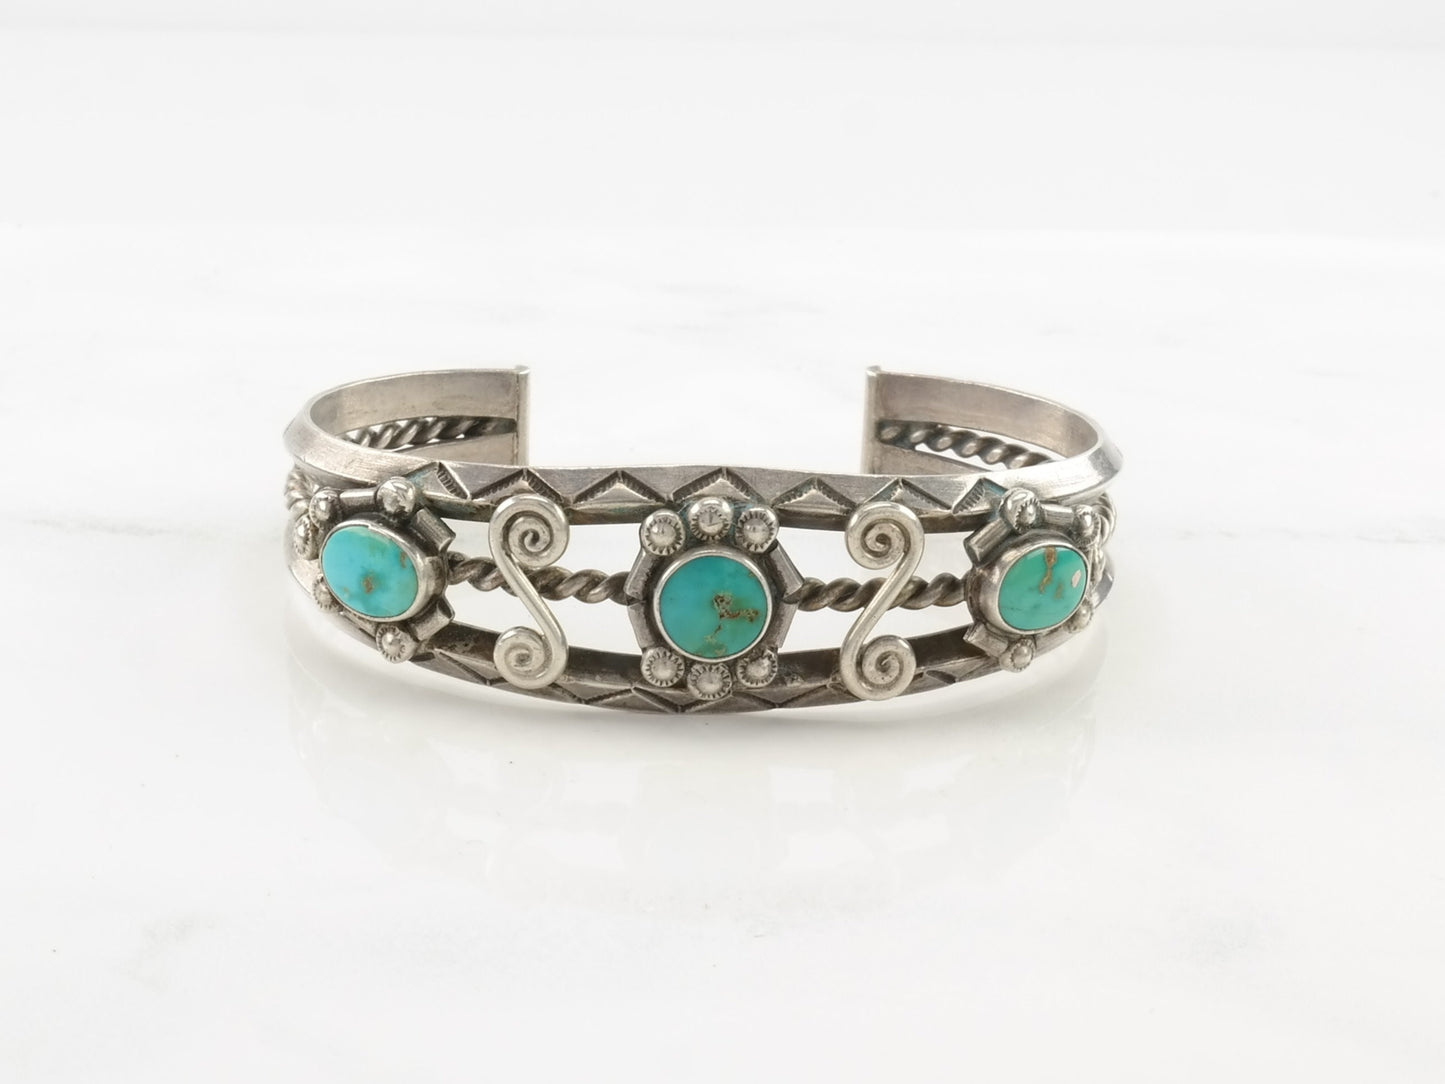 Native American Historic Blue Gem Turquoise Sterling Silver Cuff Bracelet